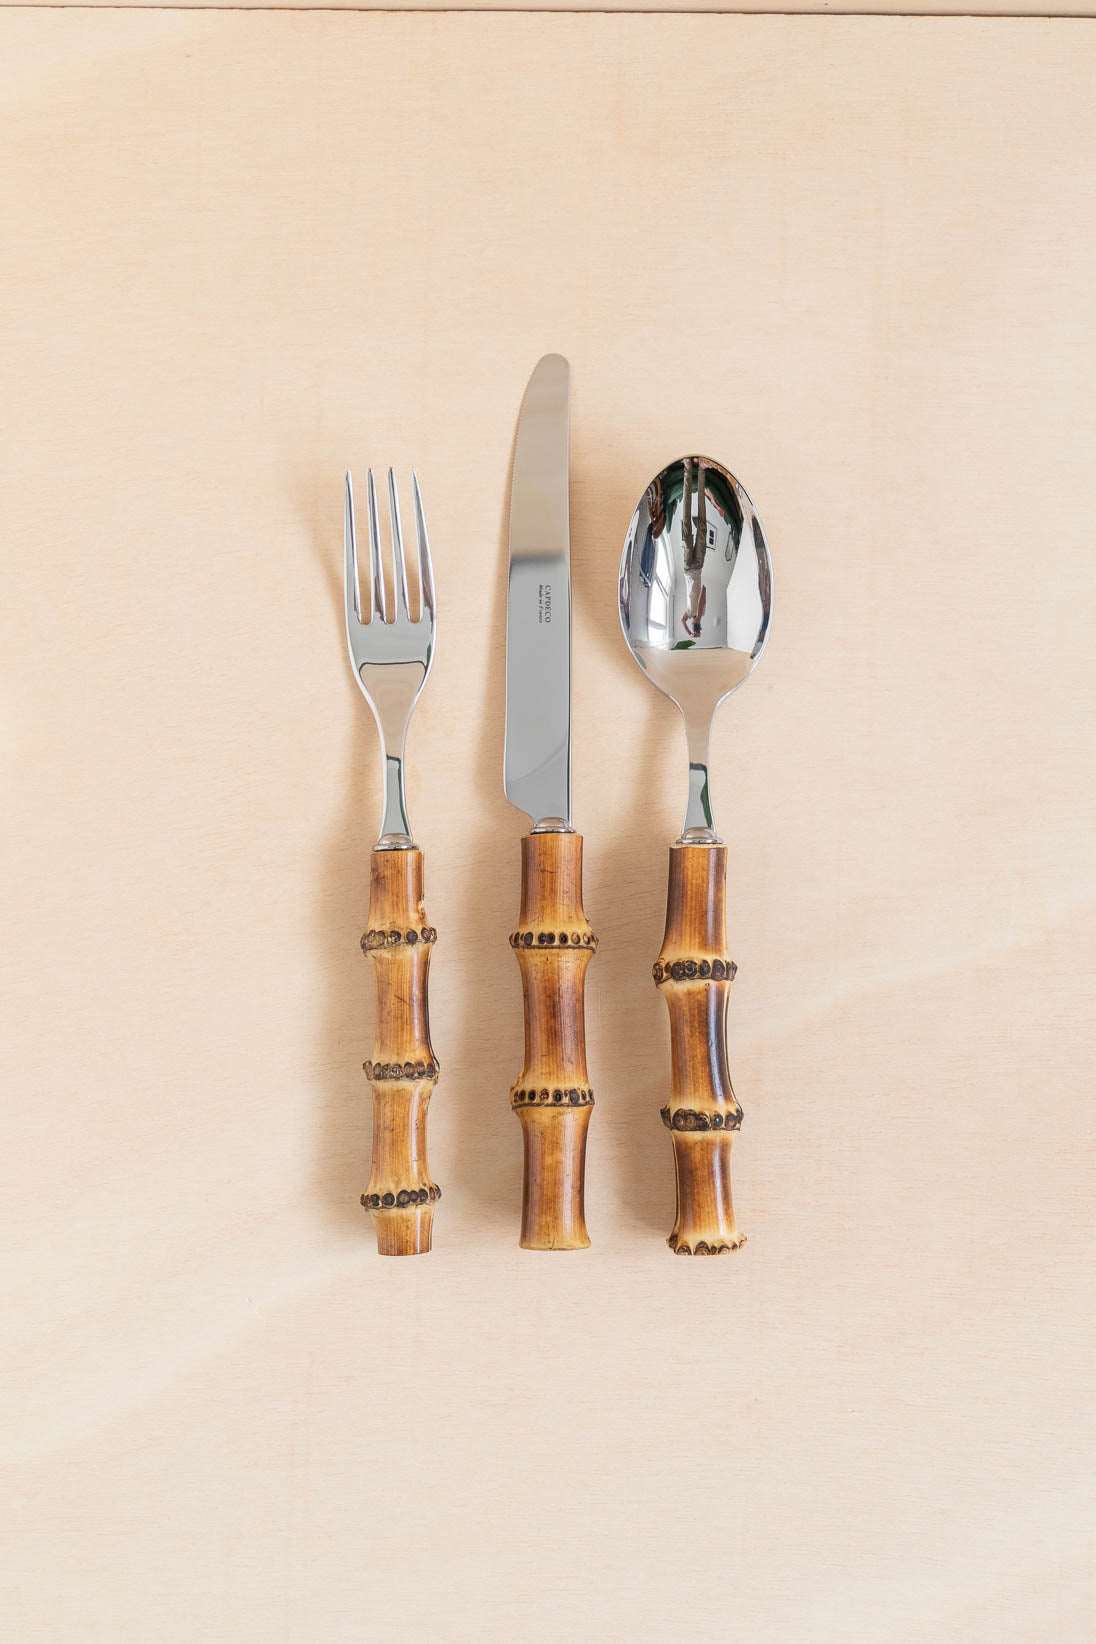 Dinner Bamboo Cutlery Set - 12 pieces